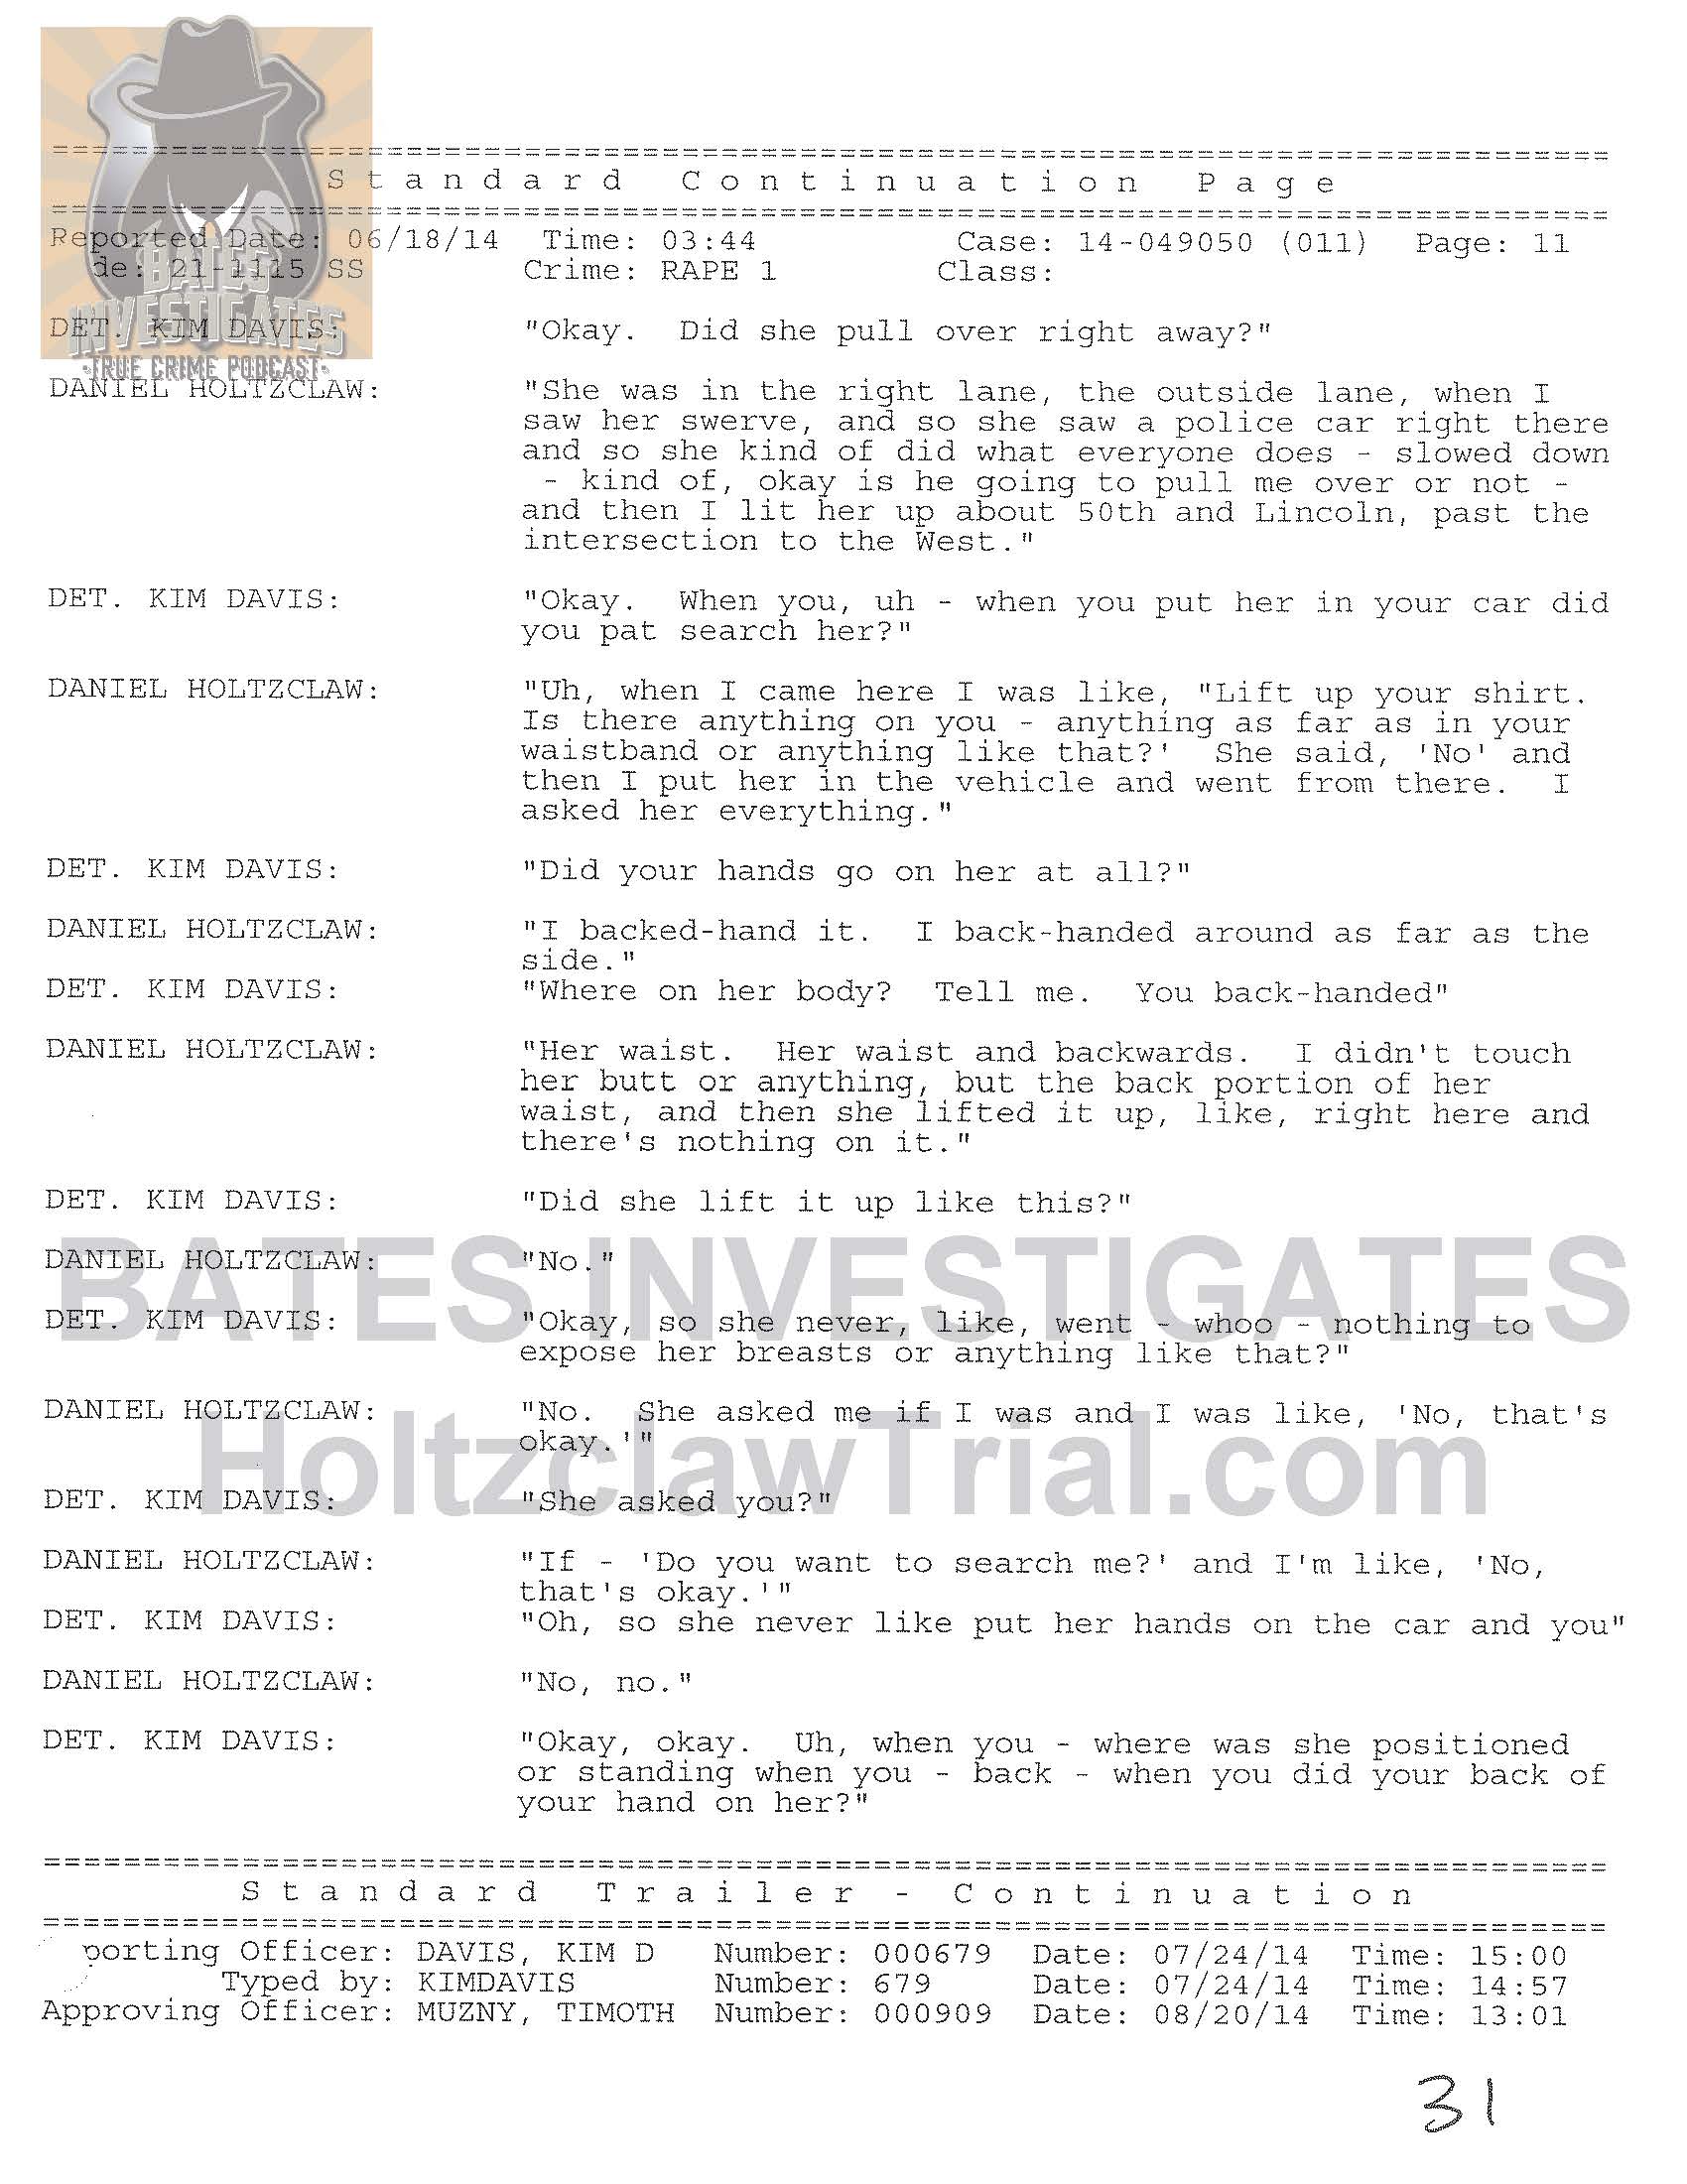 Holtzclaw Interrogation Transcript - Ep02 Redacted_Page_11.jpg